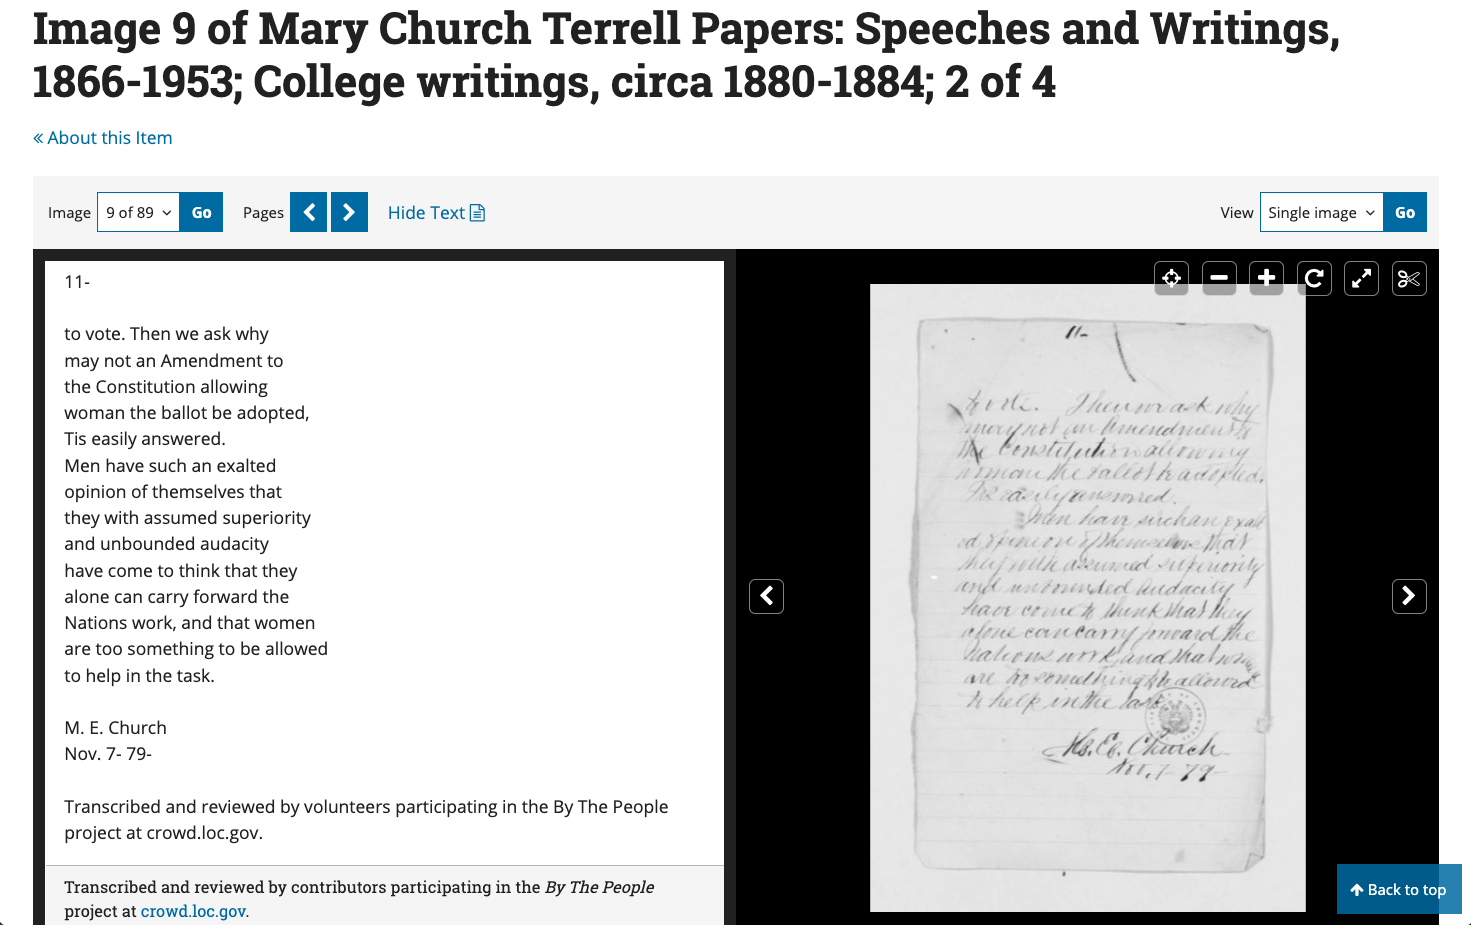 Screenshot from By the People transcription project, showing a manuscript page from the Mary Church Terrell Papers and a user's transcription of that document's text.